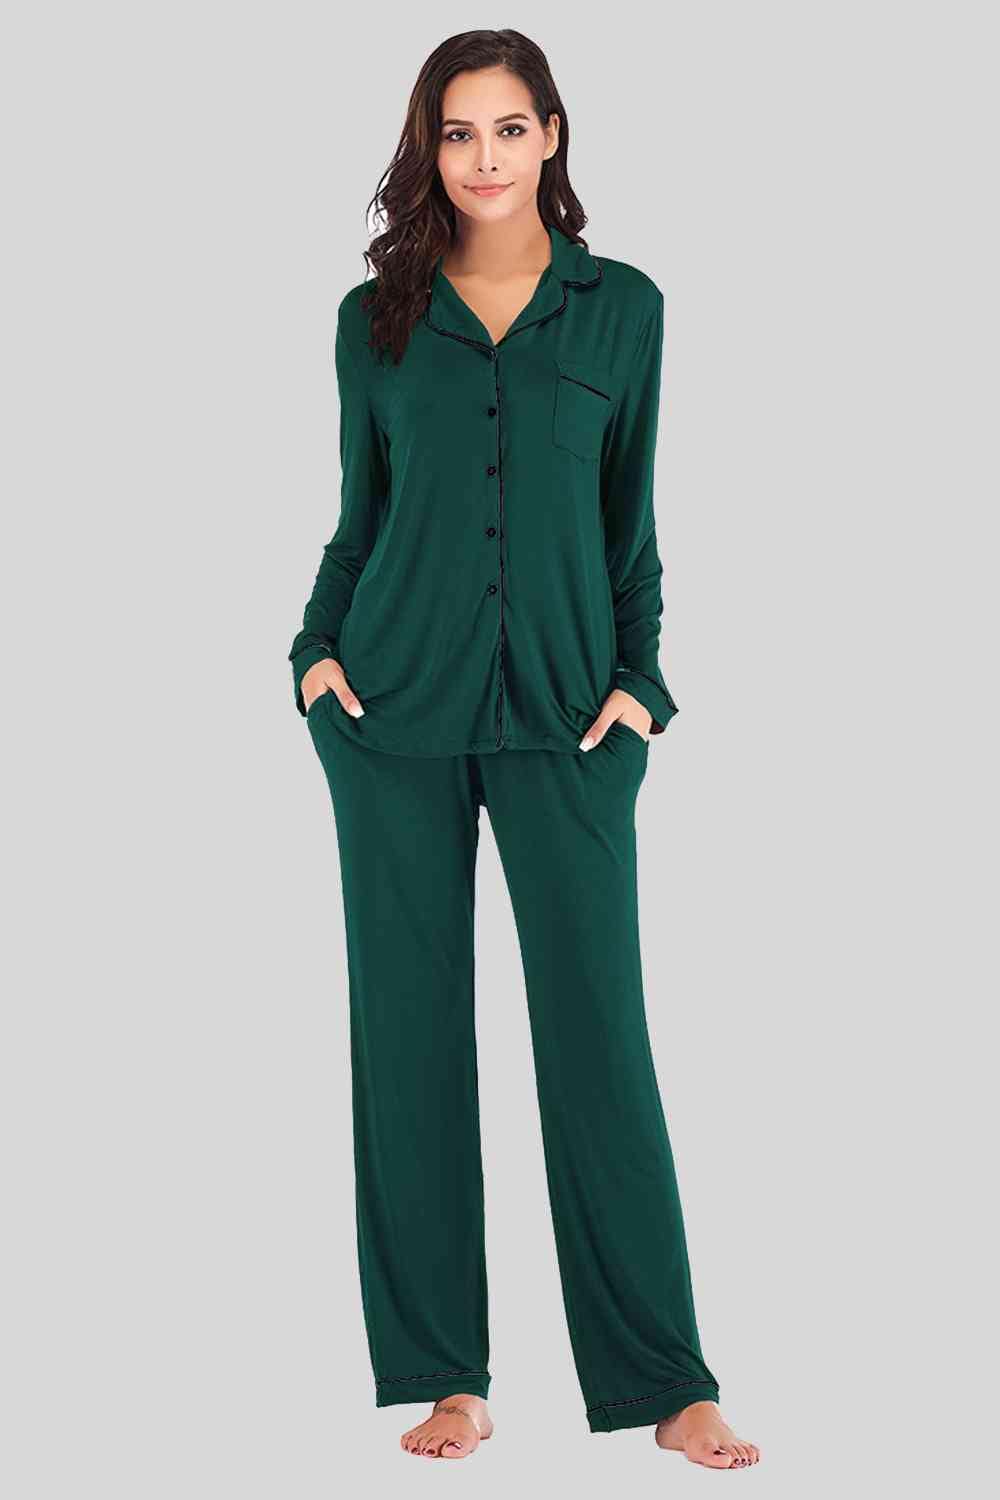 Collared Neck Long Sleeve Loungewear Set with Pockets Green / S